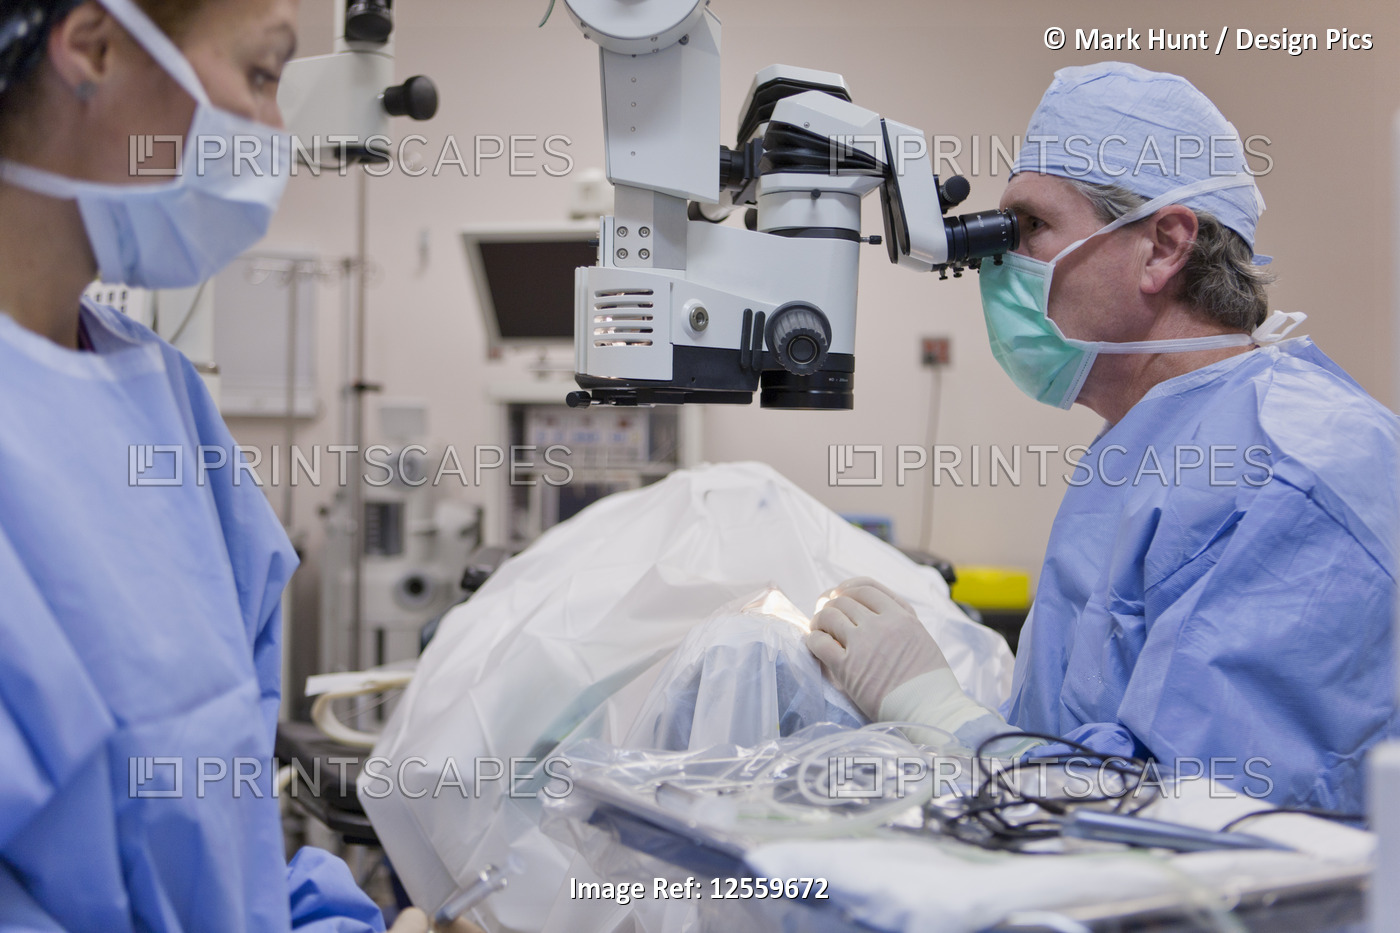 Ophthalmologist performing cataract surgery